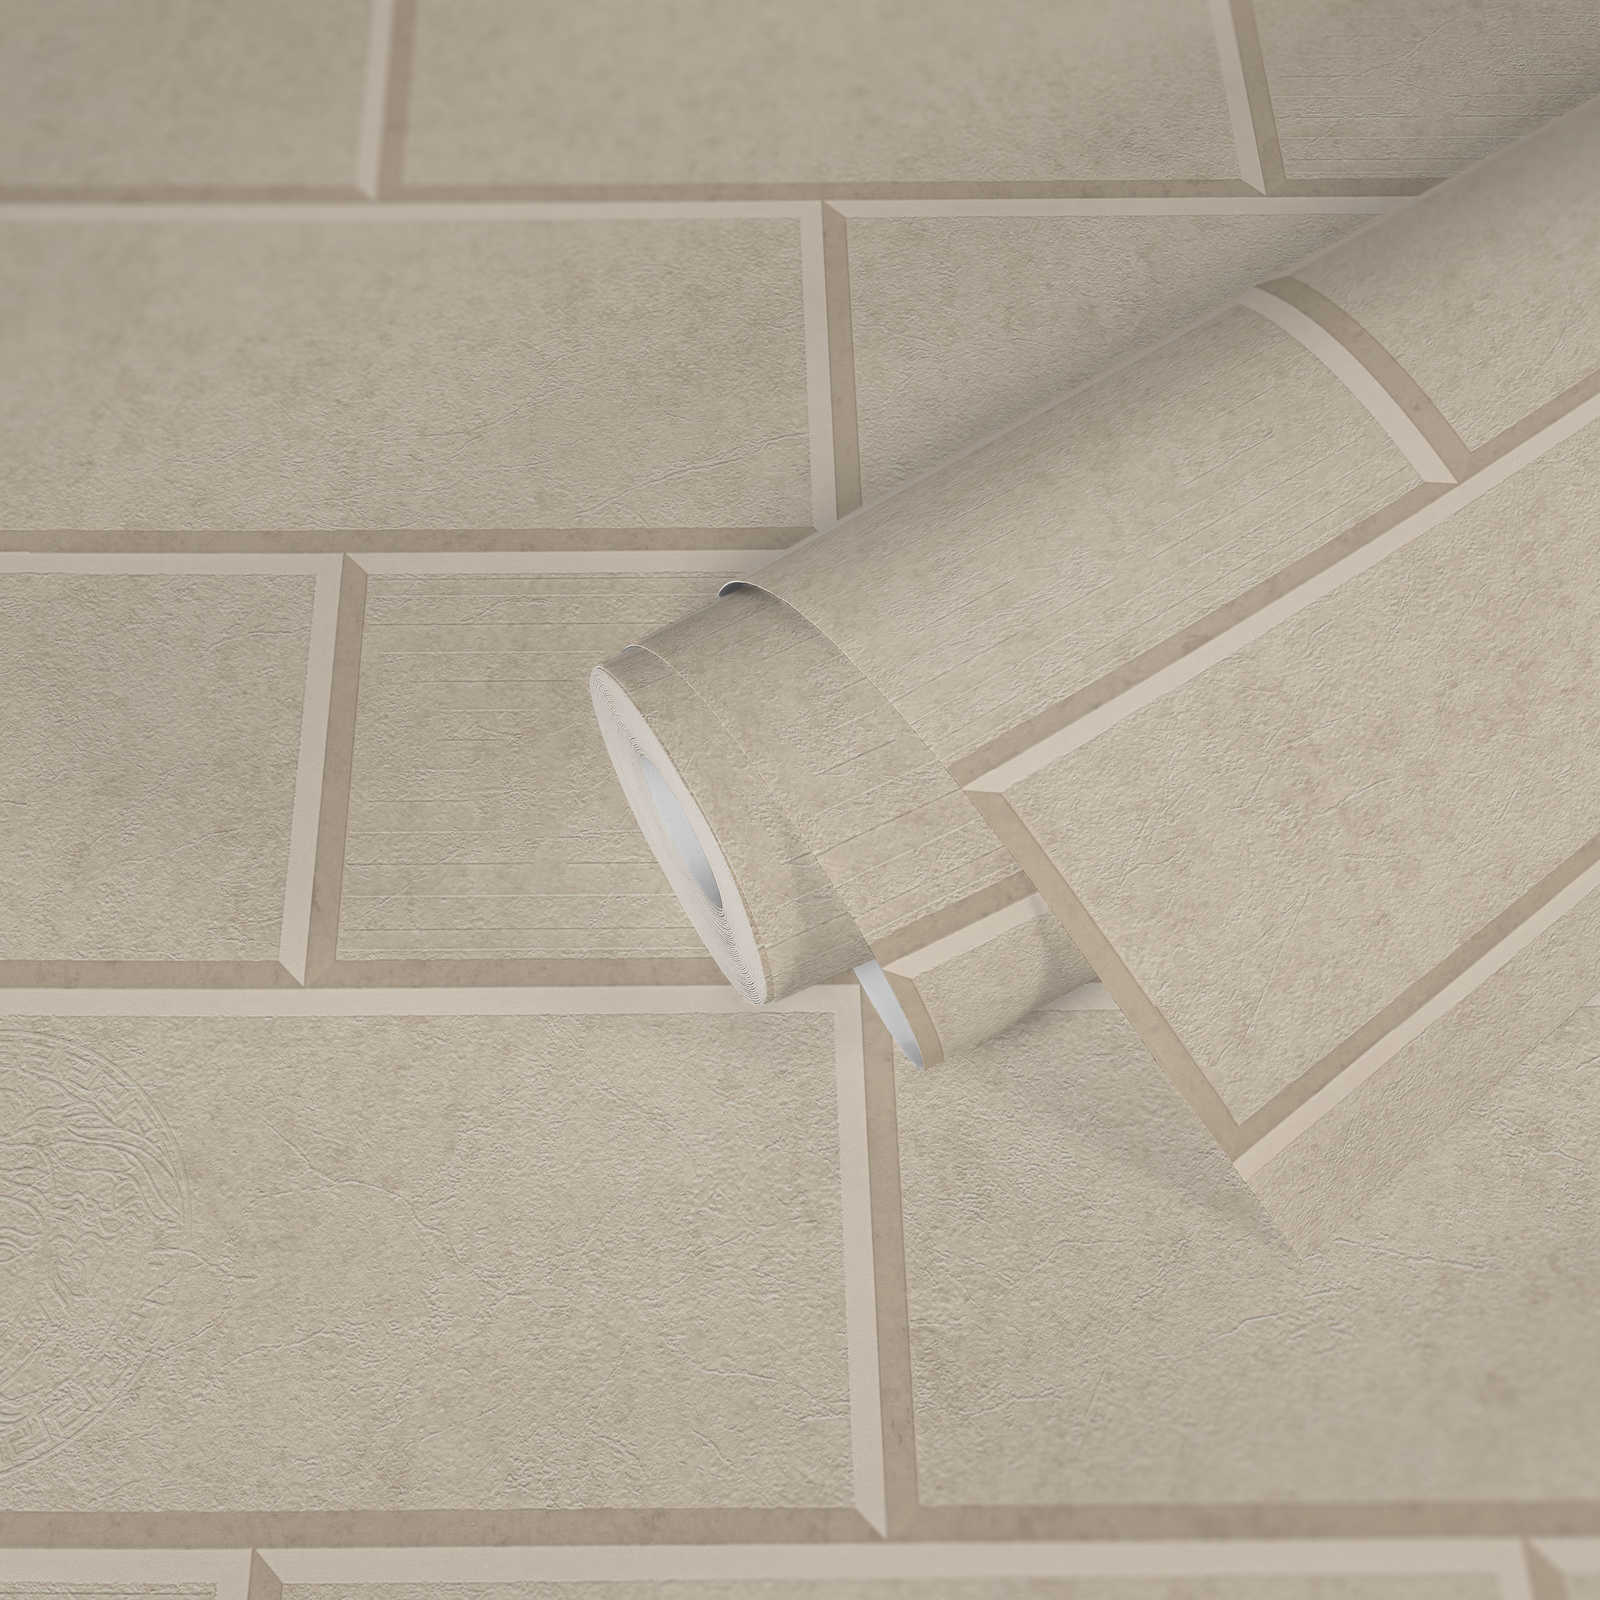             Stone look wallpaper with 3D joints in light stone - beige
        